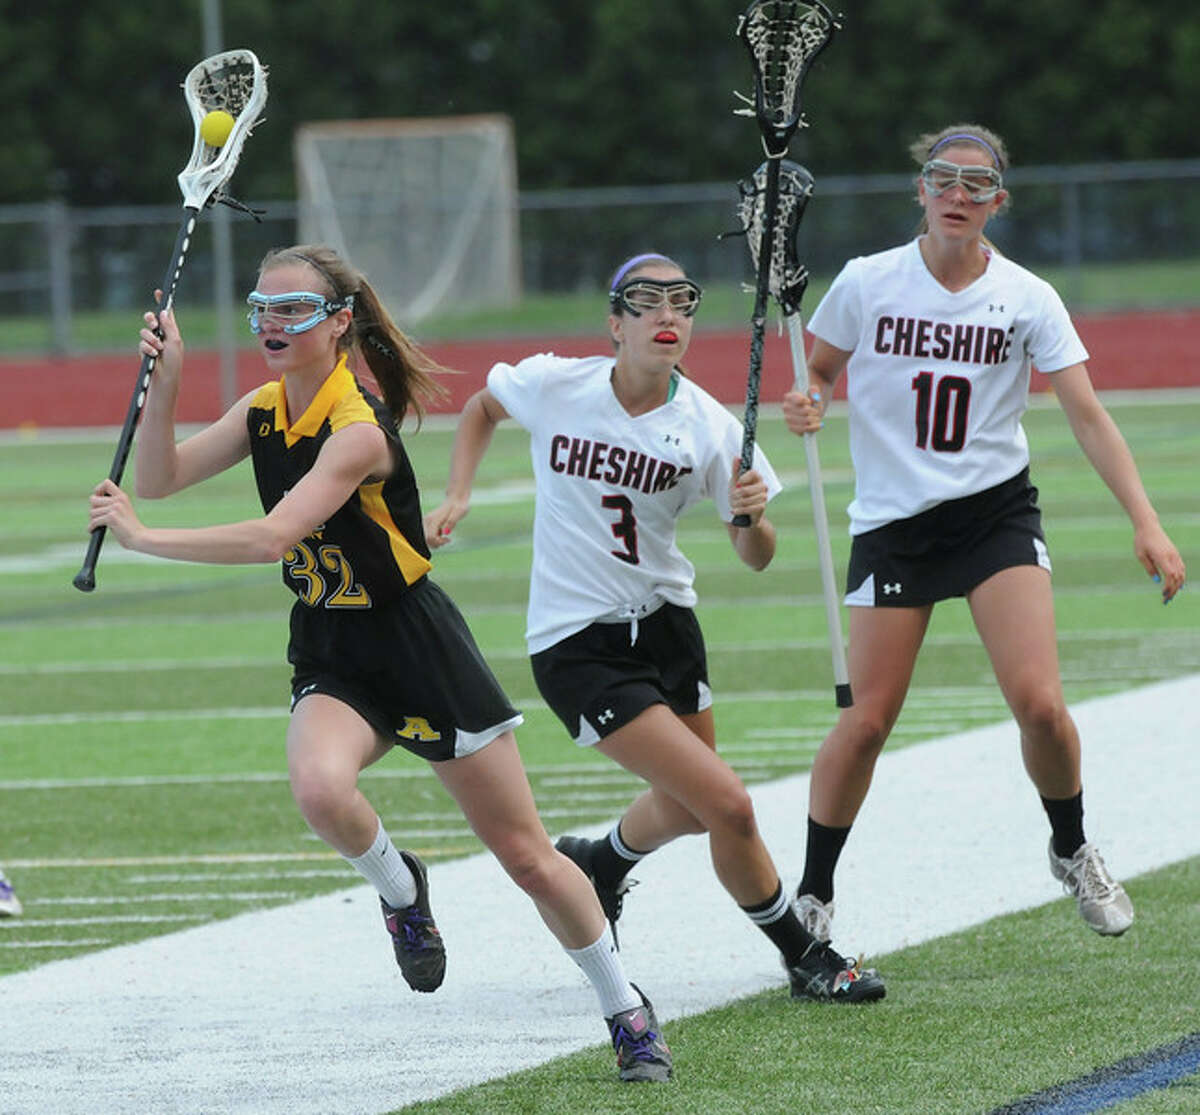 Lacrosse notebook: Confidence contagious for Amity girls